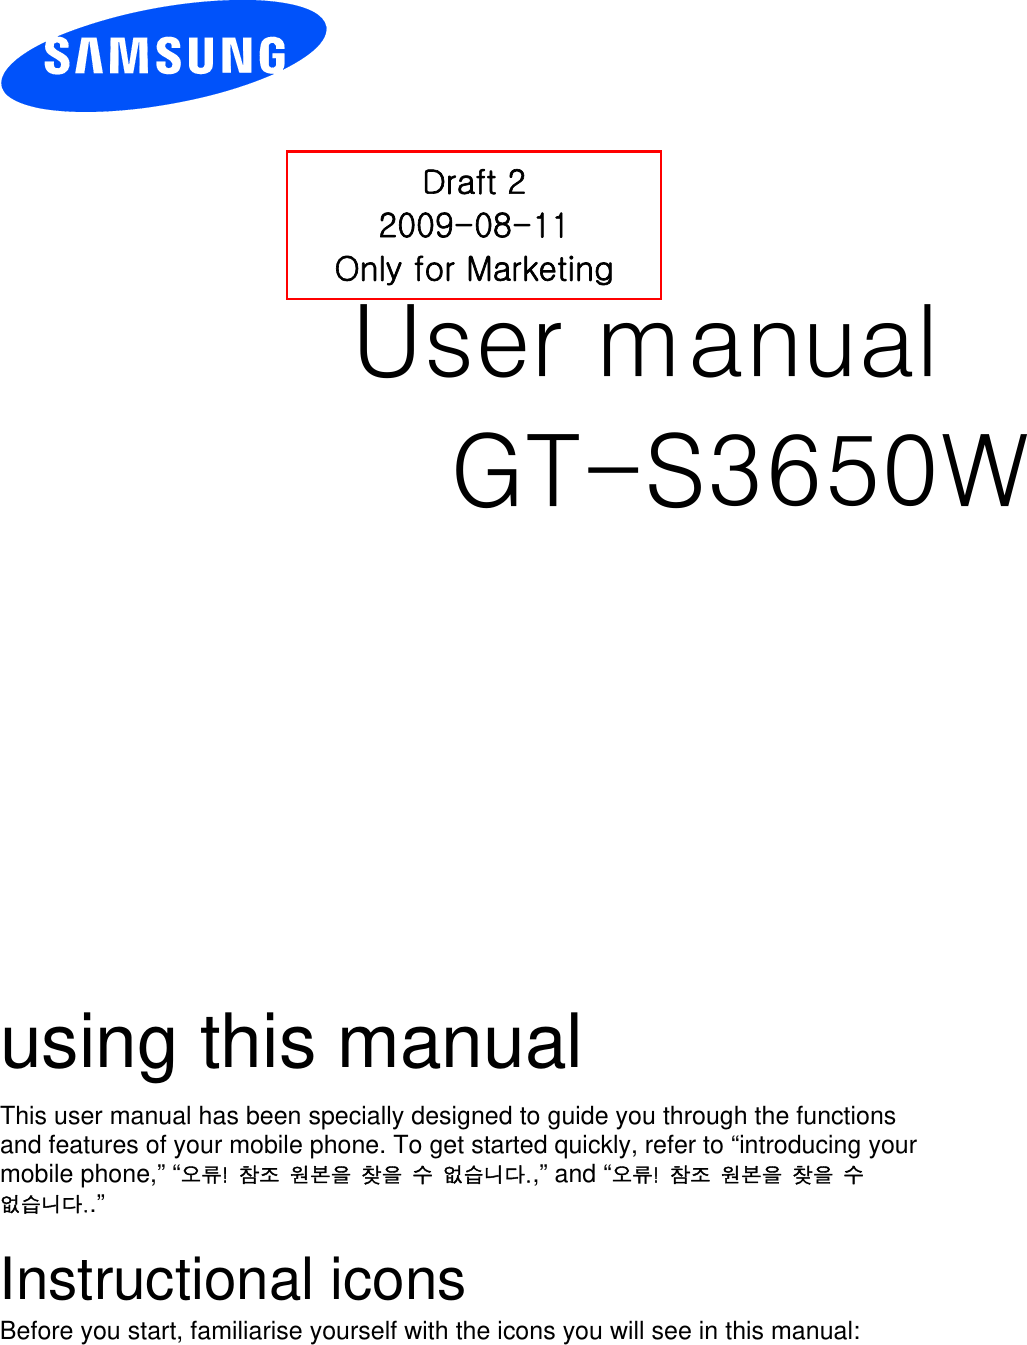          User manual GT-S3650W                  using this manual This user manual has been specially designed to guide you through the functions and features of your mobile phone. To get started quickly, refer to “introducing your mobile phone,” “오류!  참조  원본을  찾을  수  없습니다.,” and “오류!  참조  원본을  찾을  수 없습니다..”  Instructional icons Before you start, familiarise yourself with the icons you will see in this manual:   Draft 2 2009-08-11 Only for Marketing 